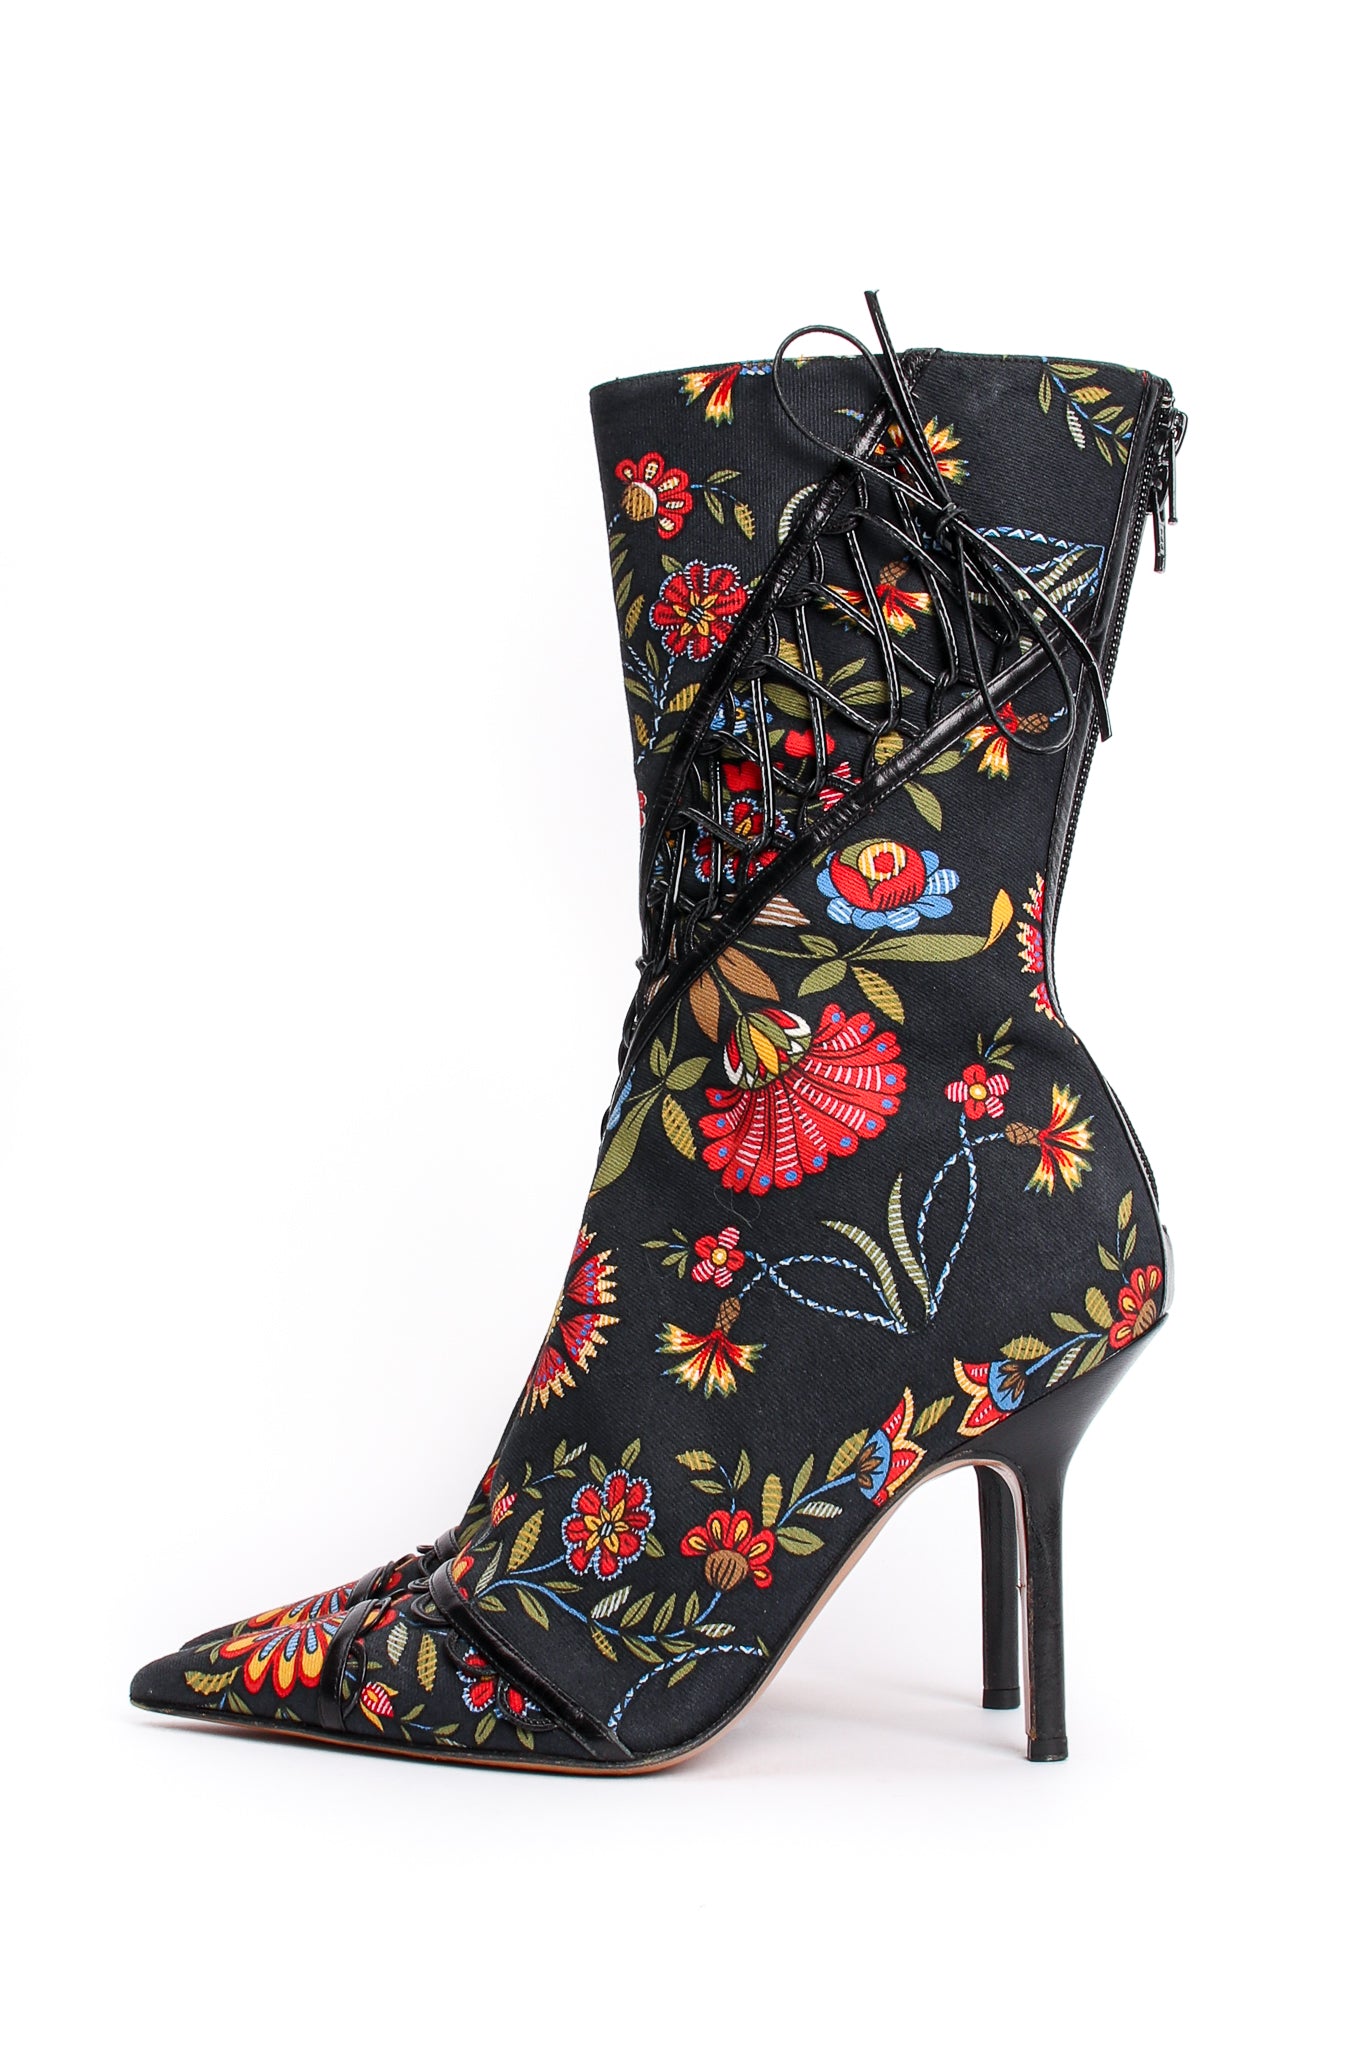 Vintage Christian Dior Floral Print Stiletto Boots side at Recess Los Angeles